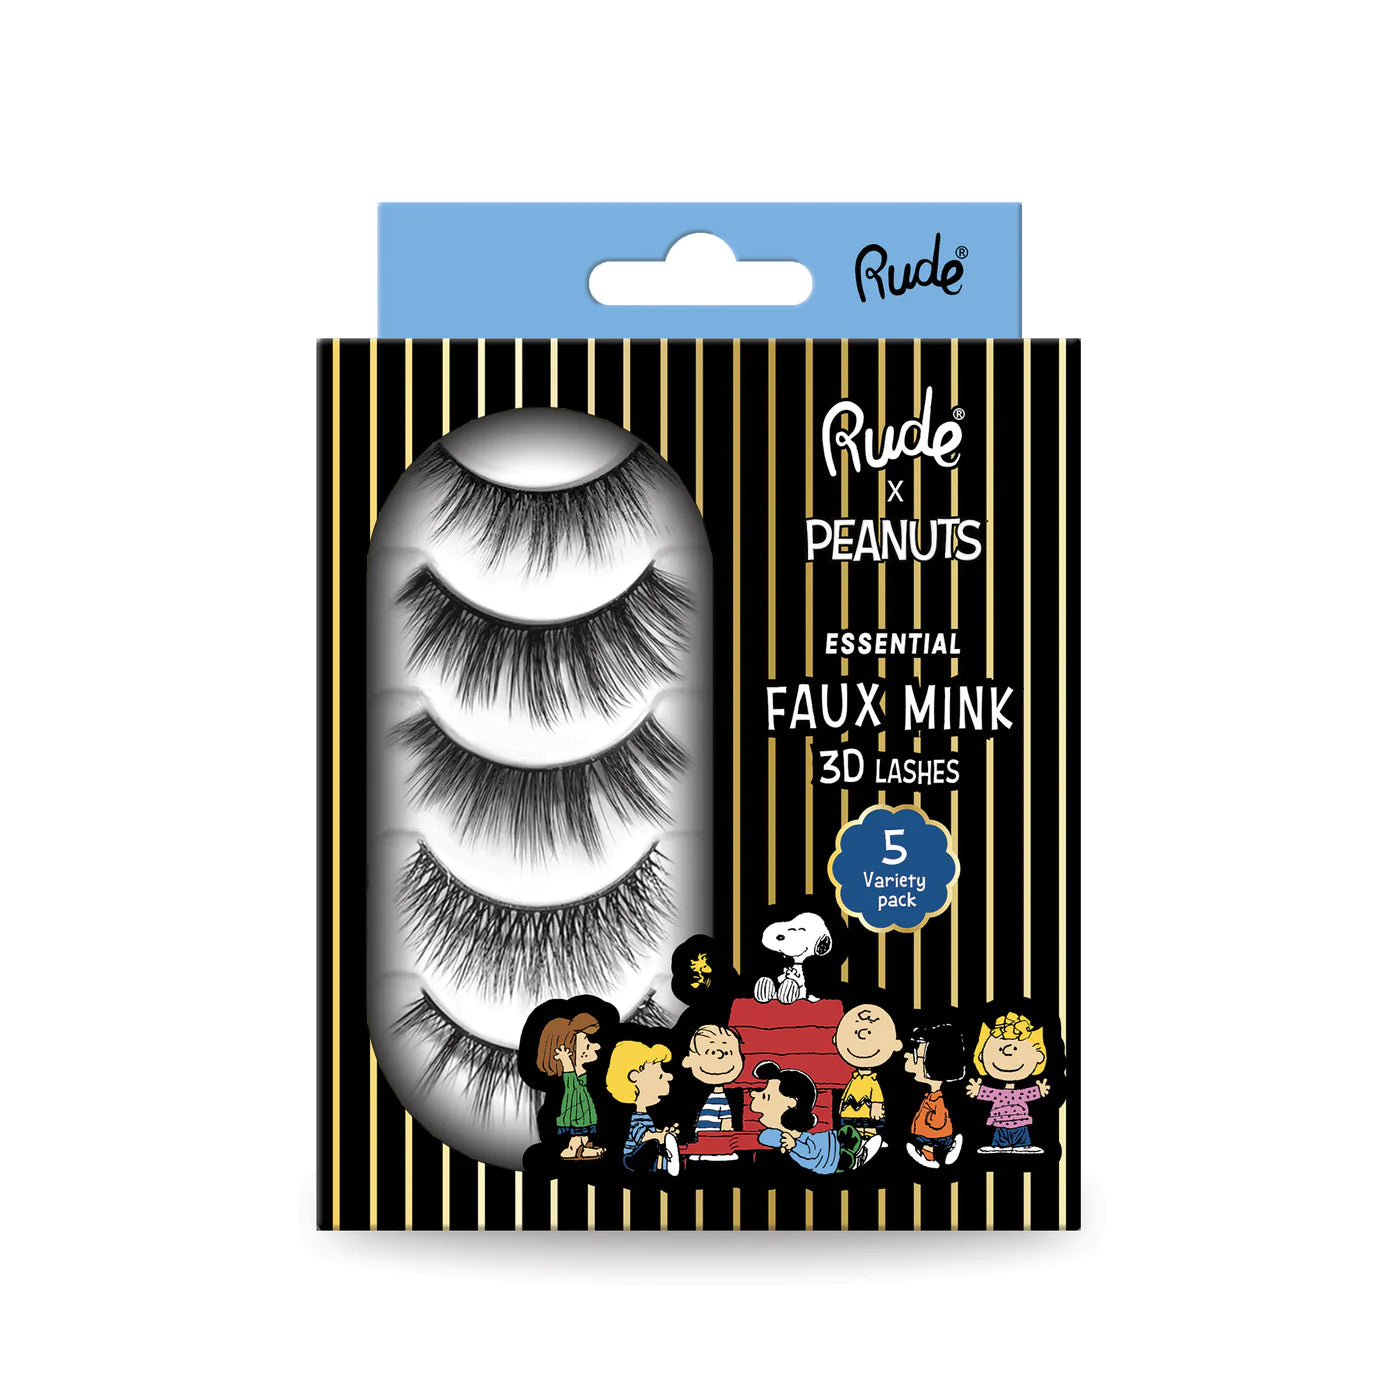 Rude Cosmetics - Peanuts Essential Faux Mink 3D Lashes 5 Variety Pack